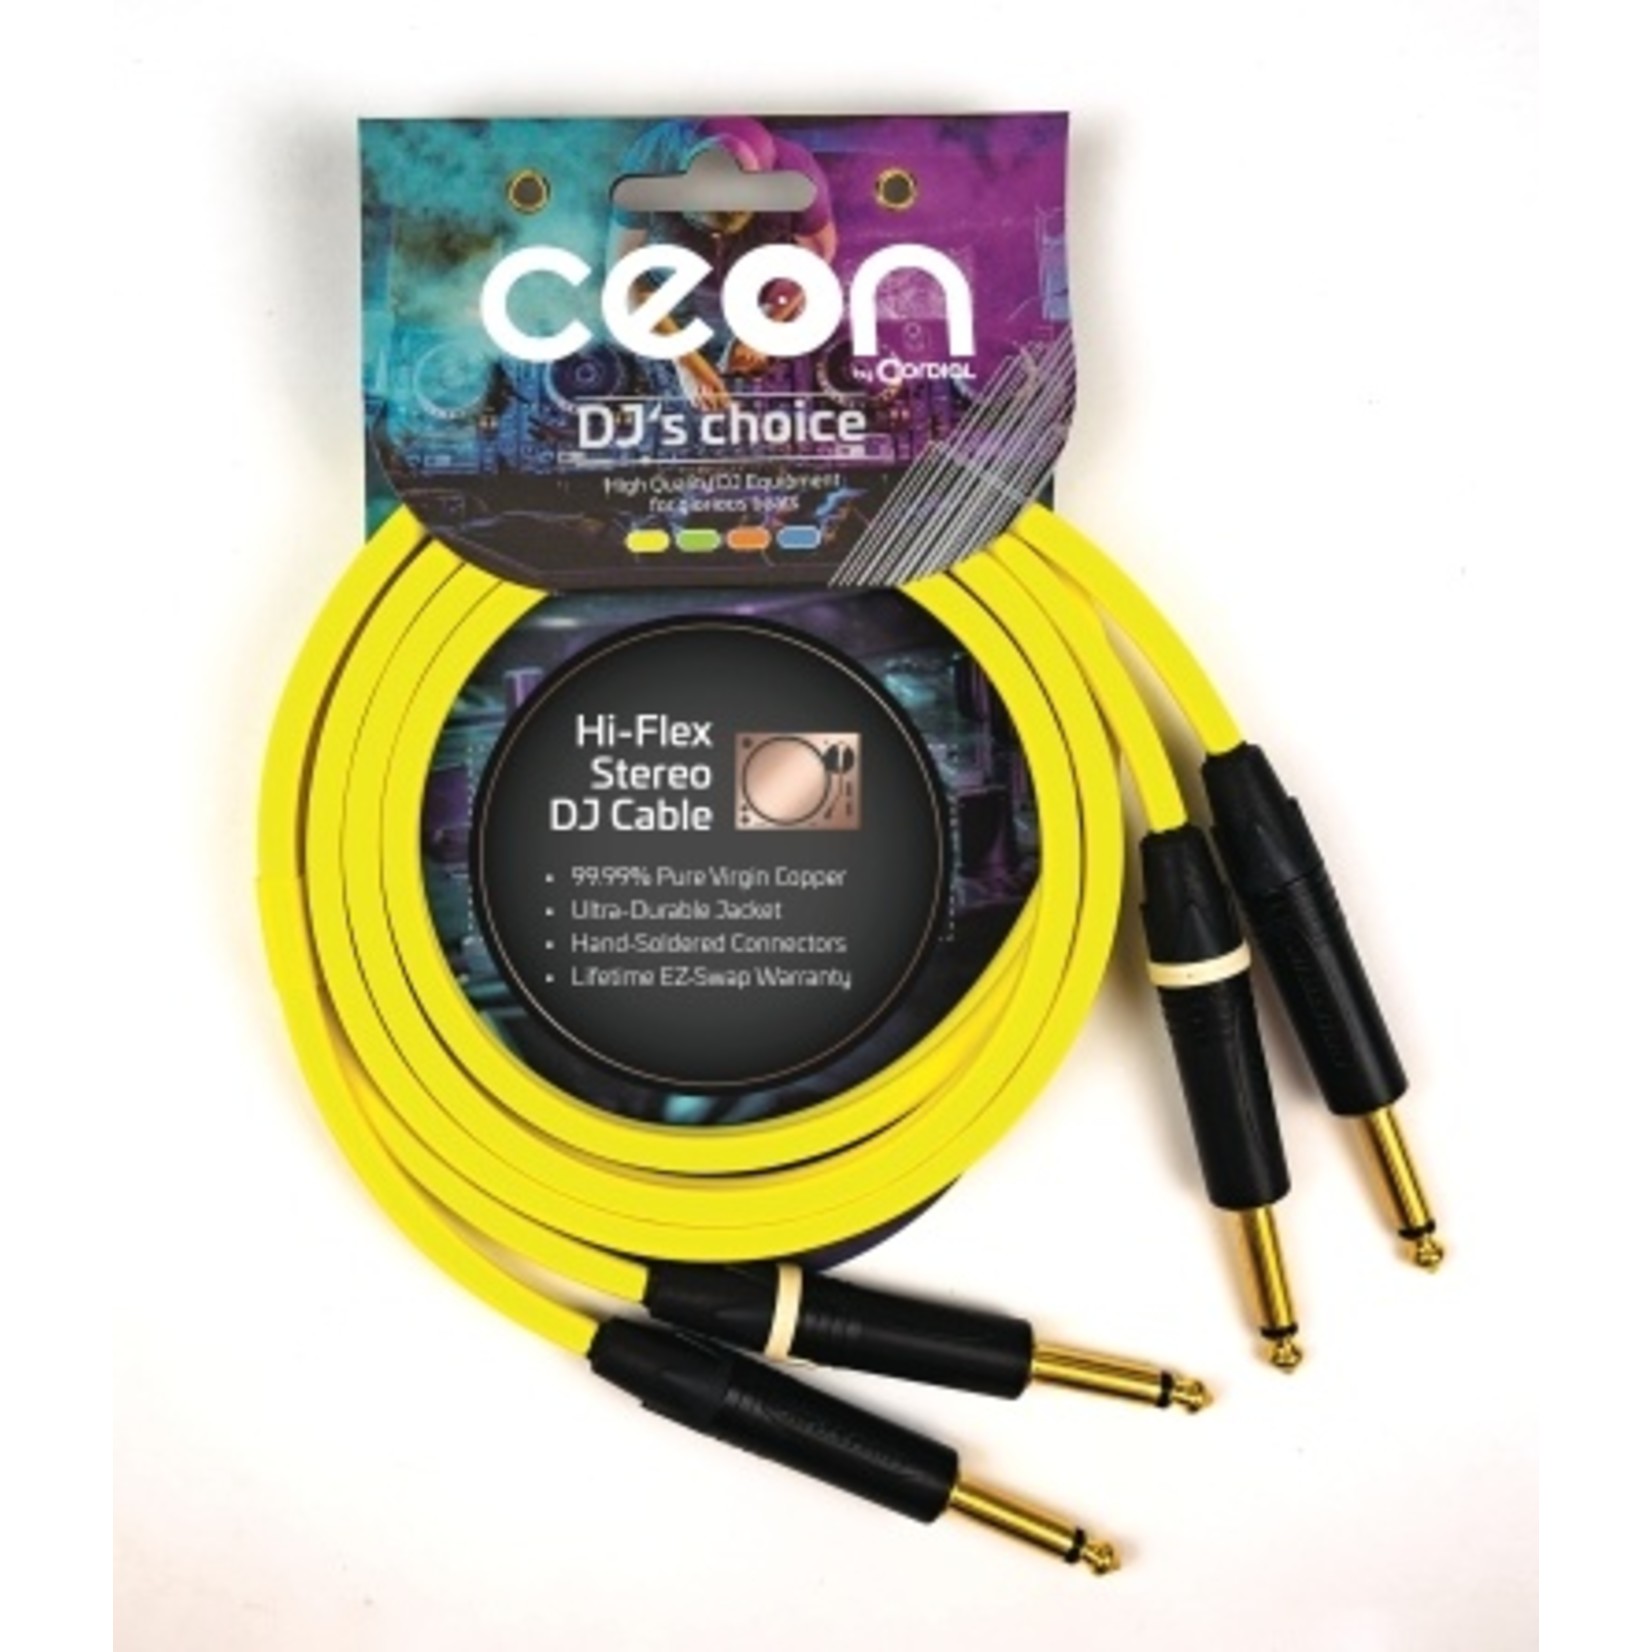 Cordial Cables Cordial Cables Premium DJ Dual/Mono (Black Light) Cable, Ceon Series - Hi-Flex DJ's Choice Stereo 1/4" TS to 1/4" TS 2-Foot Cable: Neon Yellow